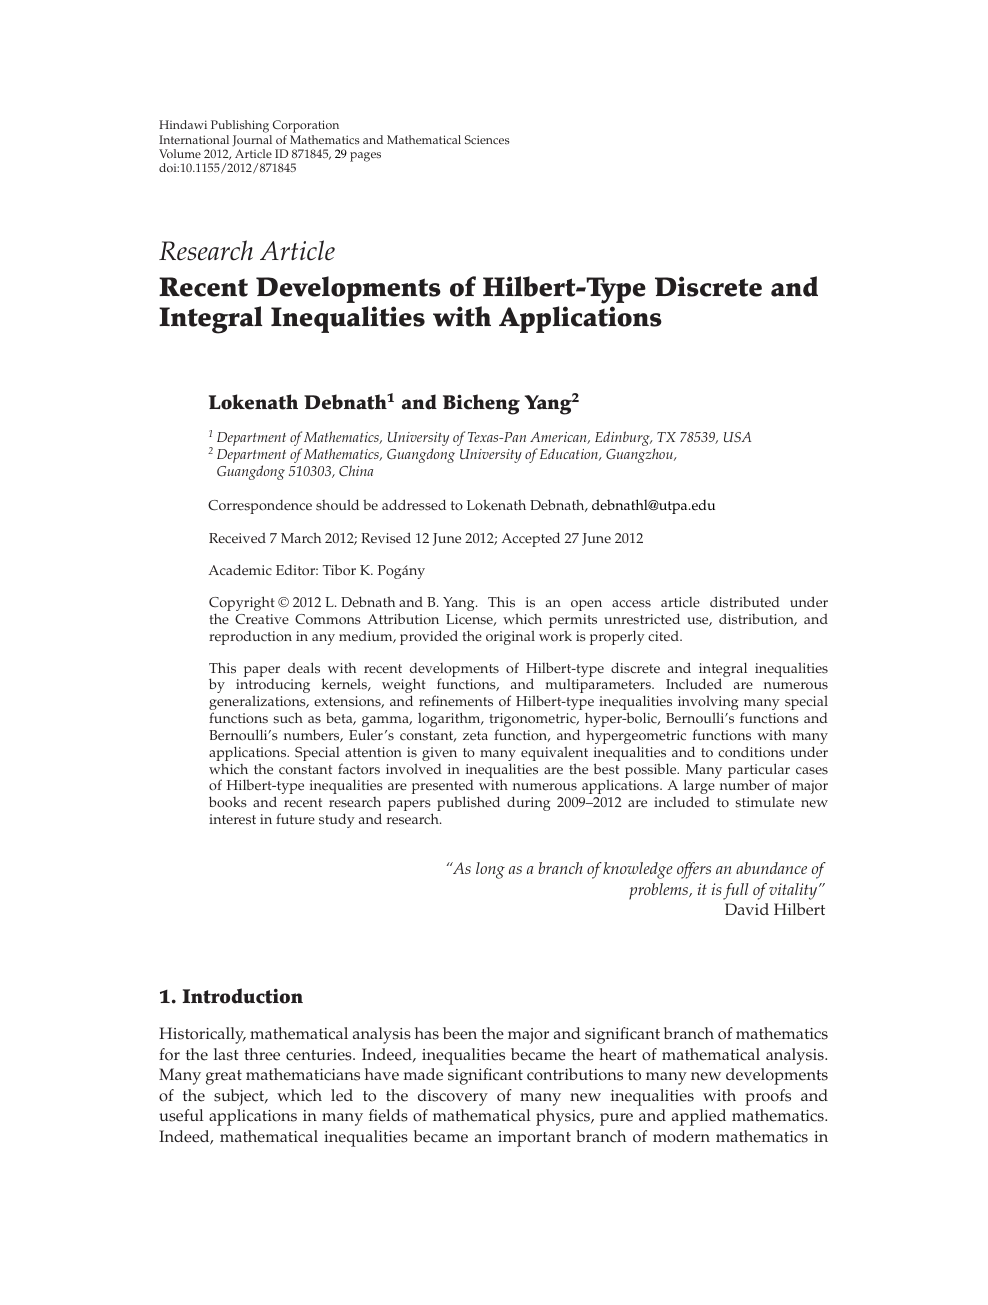 Recent Developments Of Hilbert Type Discrete And Integral Inequalities With Applications Topic Of Research Paper In Mathematics Download Scholarly Article Pdf And Read For Free On Cyberleninka Open Science Hub